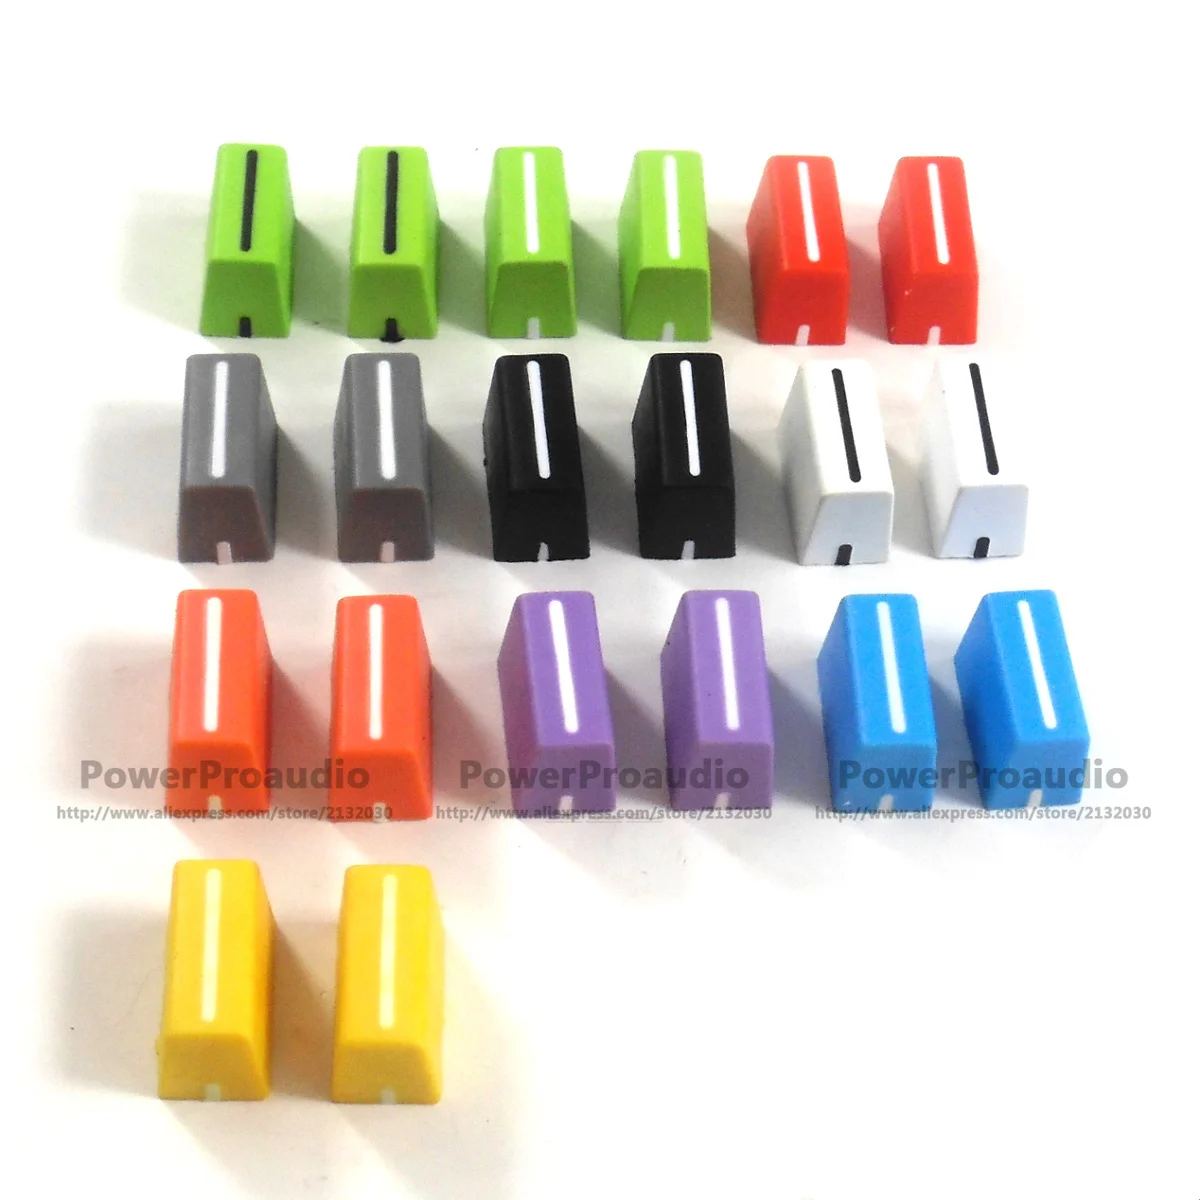 

20pcs/lot New Channel Crossfader Fader Knob Cap For RANE 56 57 61 62 64 68 COLORFUL chose you want the color